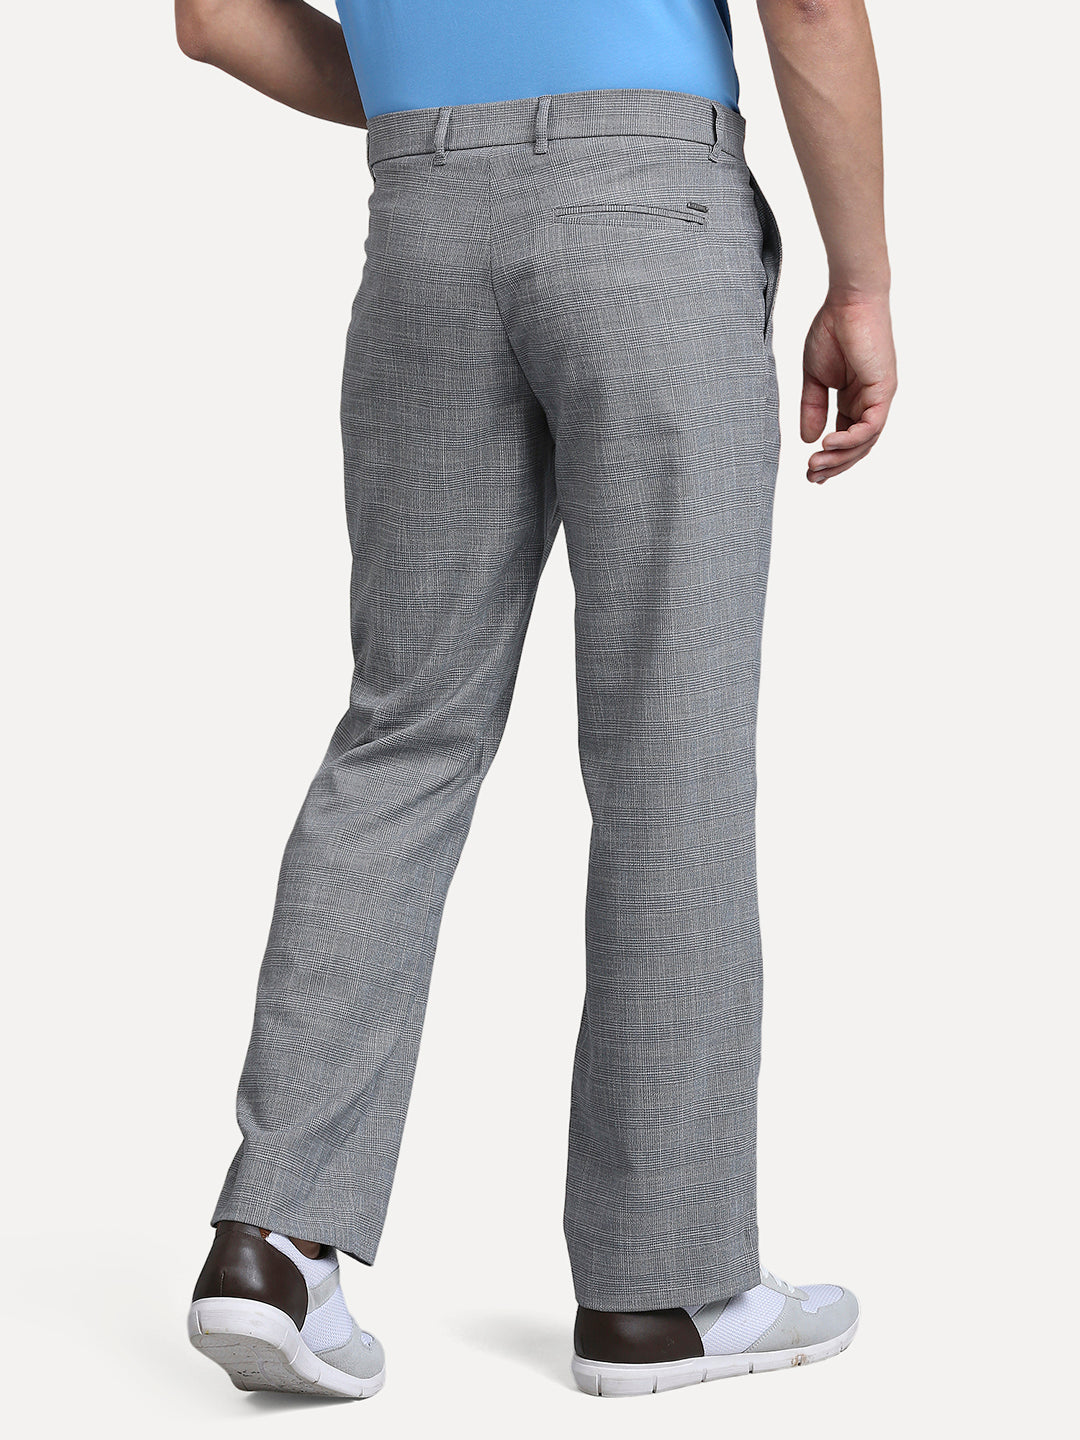 Soft Touch Grey Glide Trouser